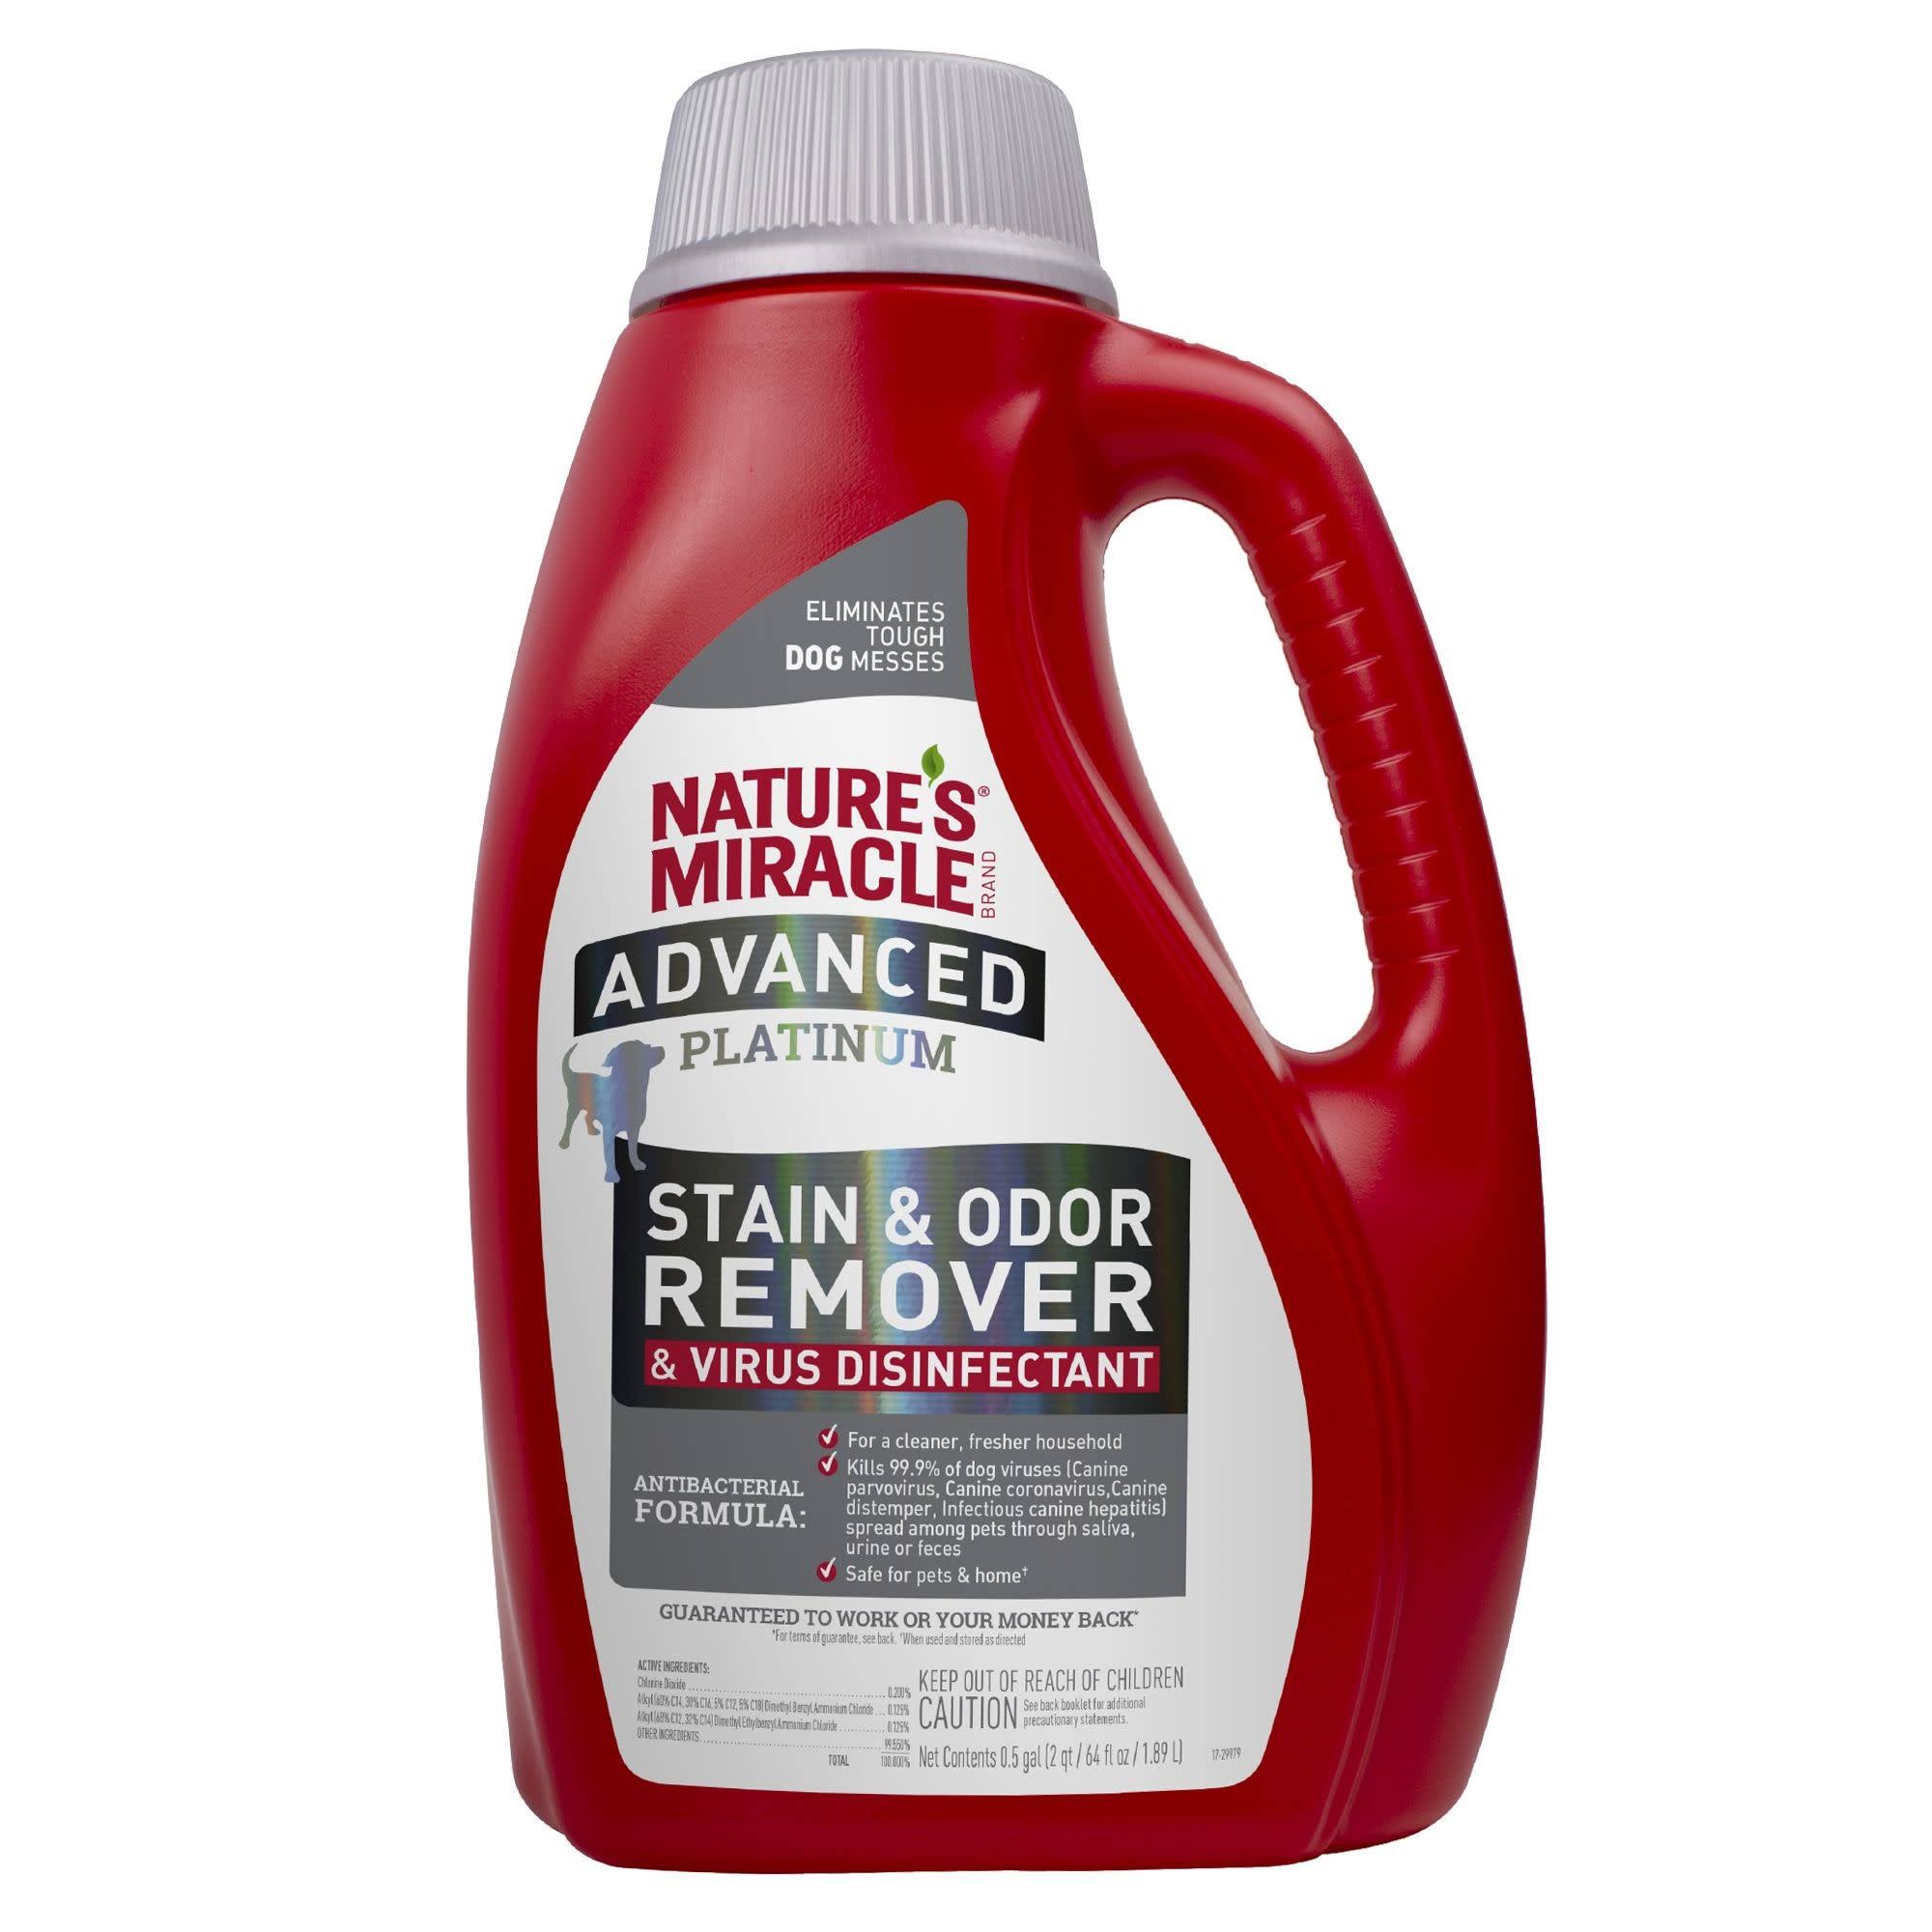 Nature's Miracle Advanced Platinum Stain & Odor Remover & Virus Disinfectant (64 oz)